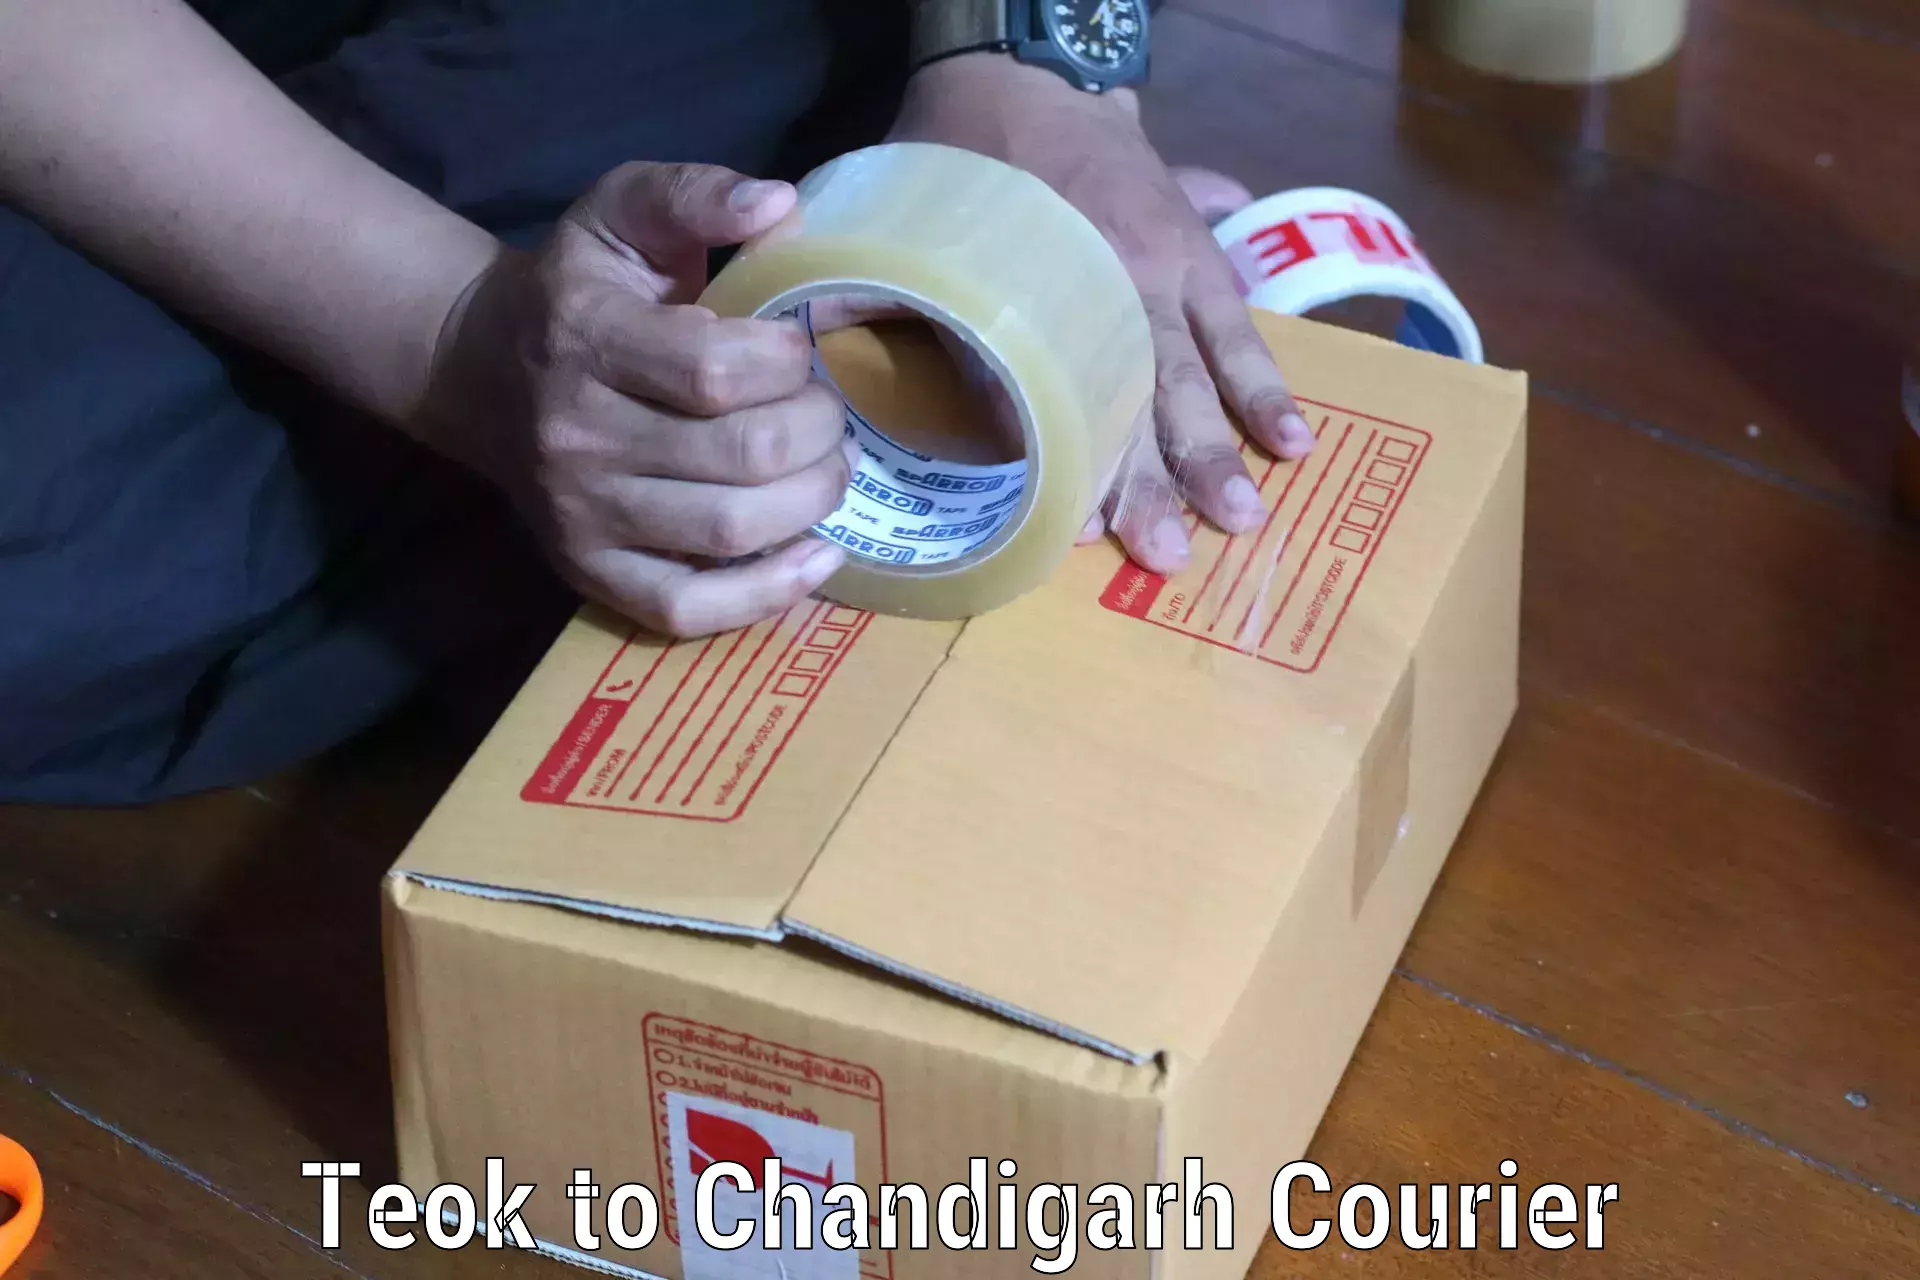 Global shipping networks Teok to Chandigarh